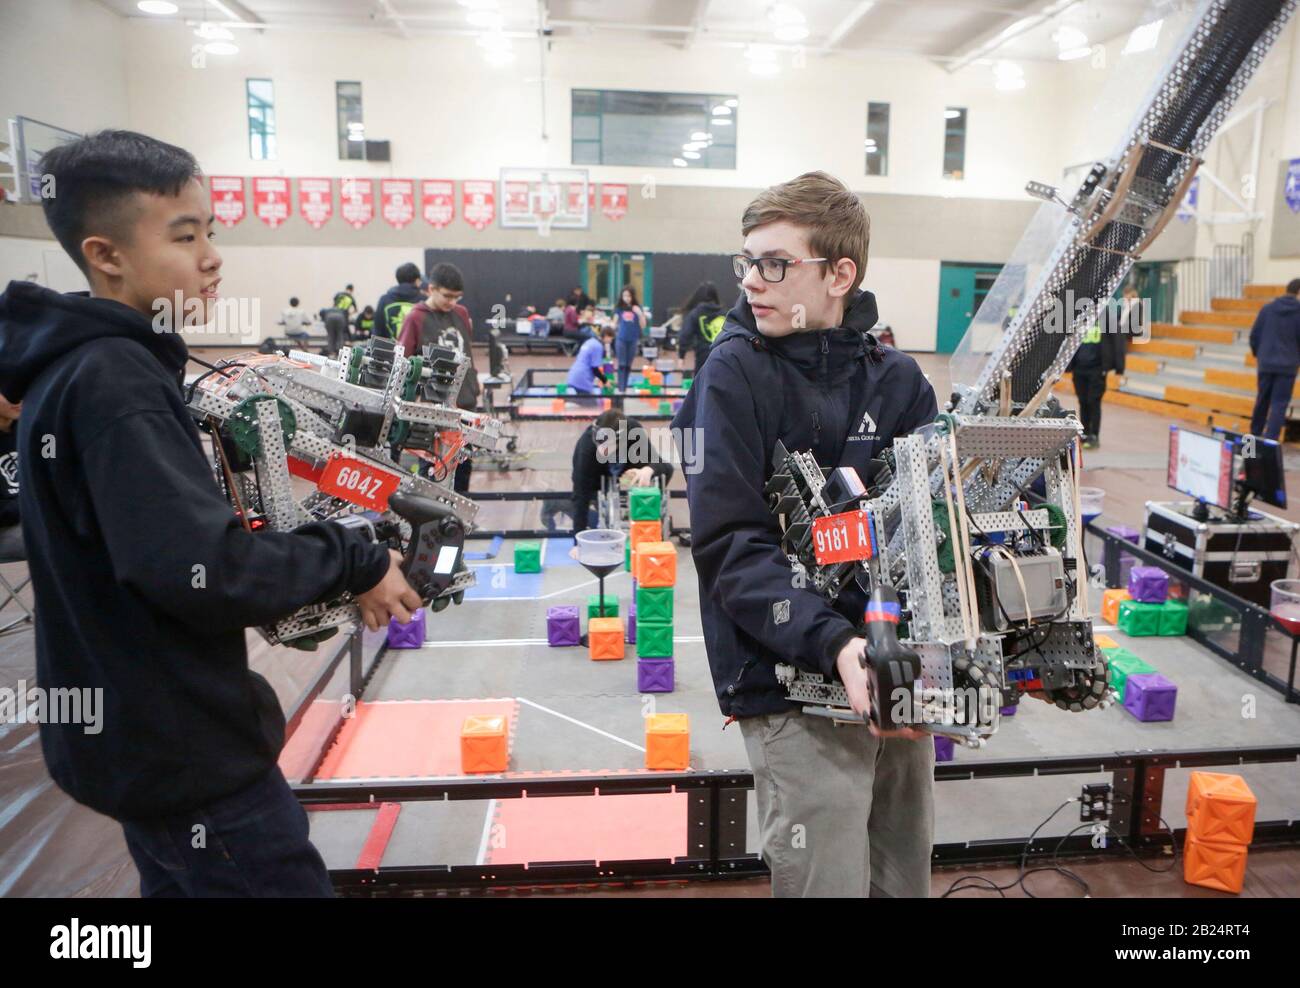 Vancouver, Canada. 29th Feb, 2020. Contestants bring their to the match field during the regional competition in Vancouver, Canada, on Feb. 29, 2020. of high school students teamed